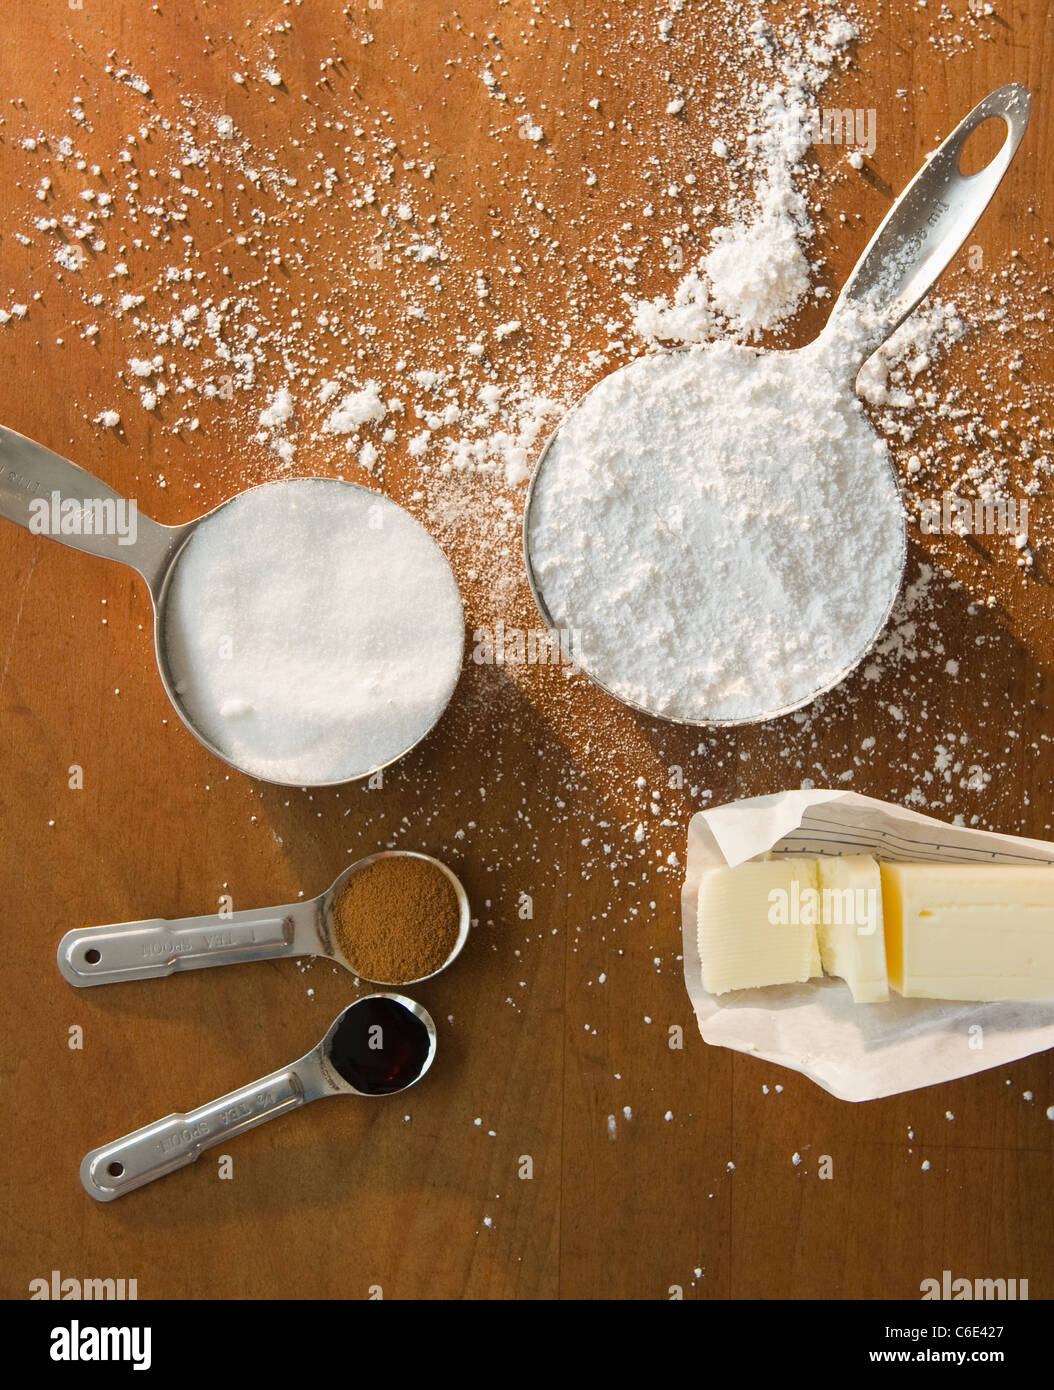 Close up of flour and baking ingredients Stock Photo